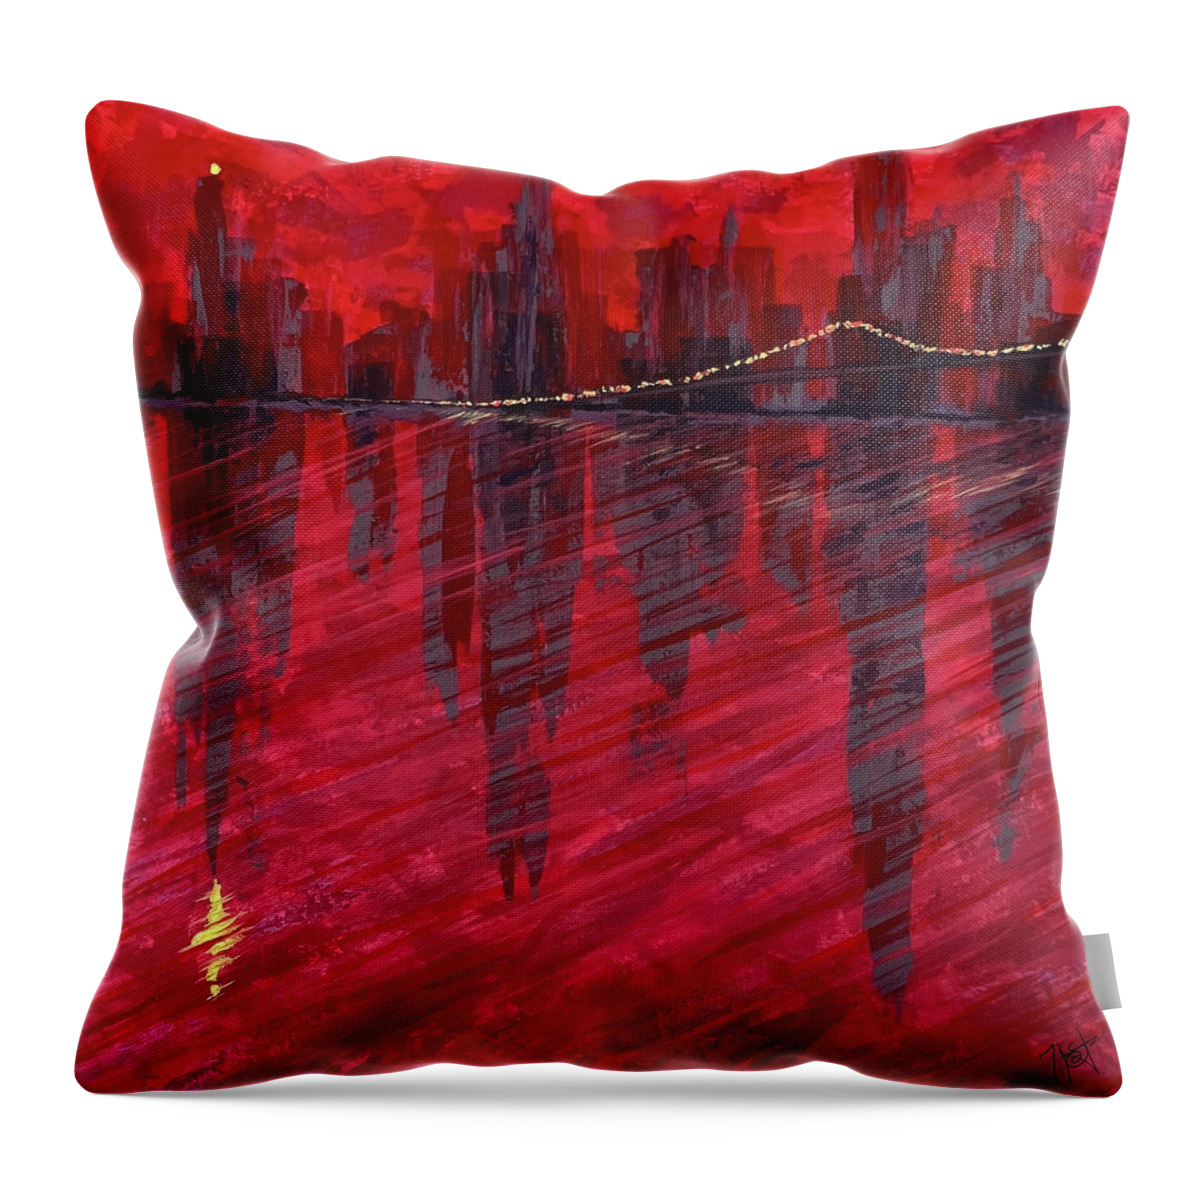 Abstract Throw Pillow featuring the painting Scarlet by Tes Scholtz